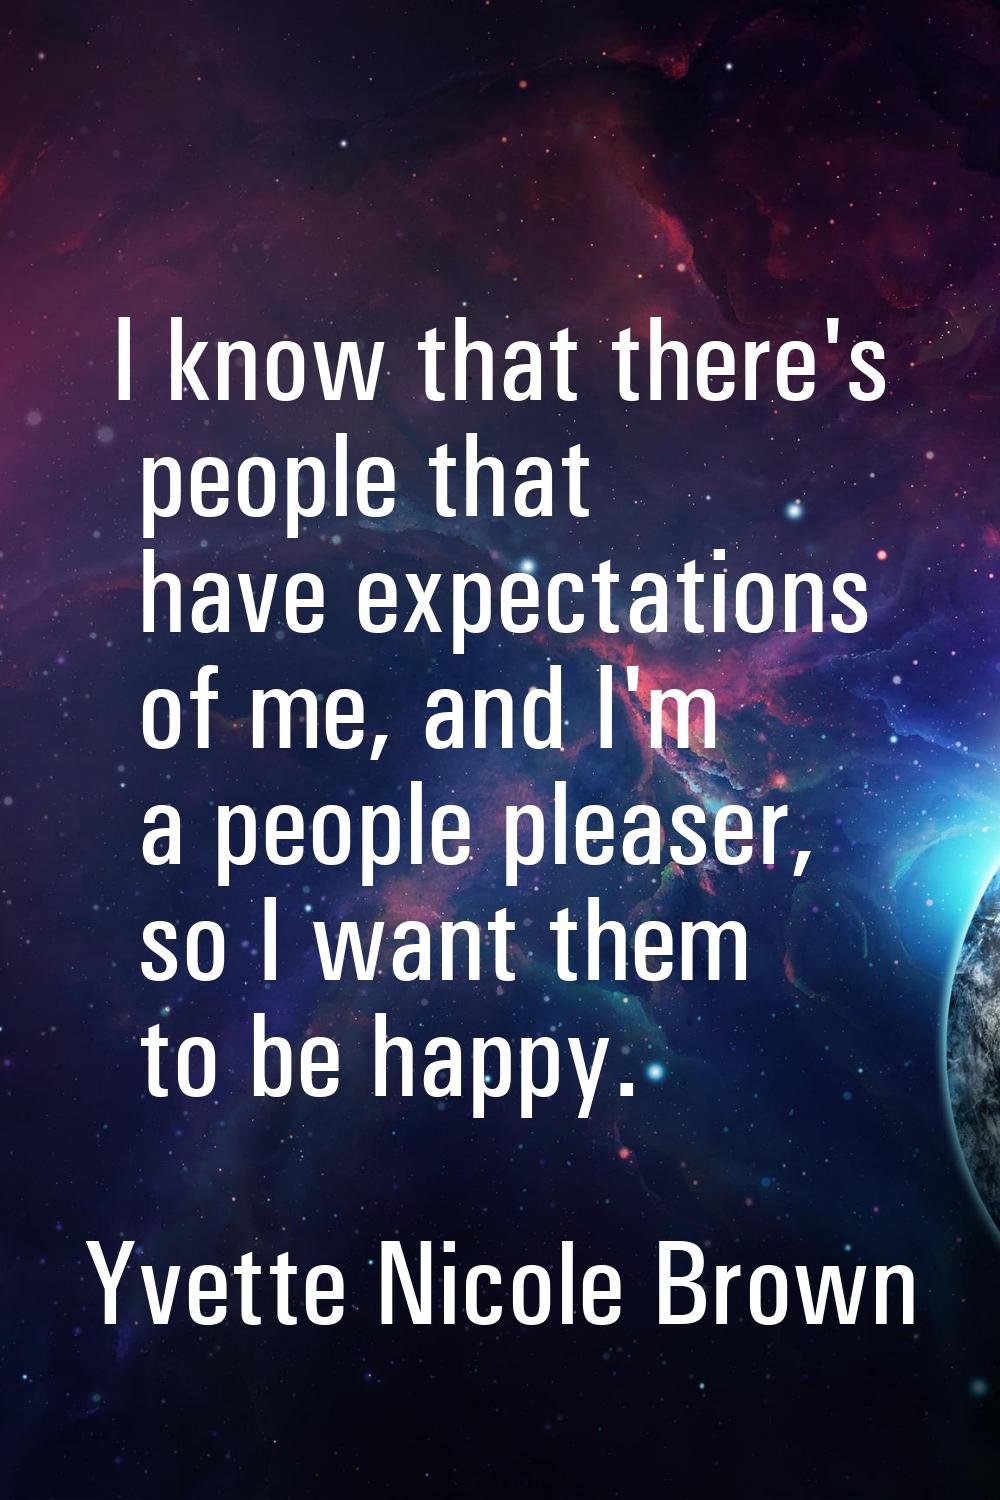 I know that there's people that have expectations of me, and I'm a people pleaser, so I want them t